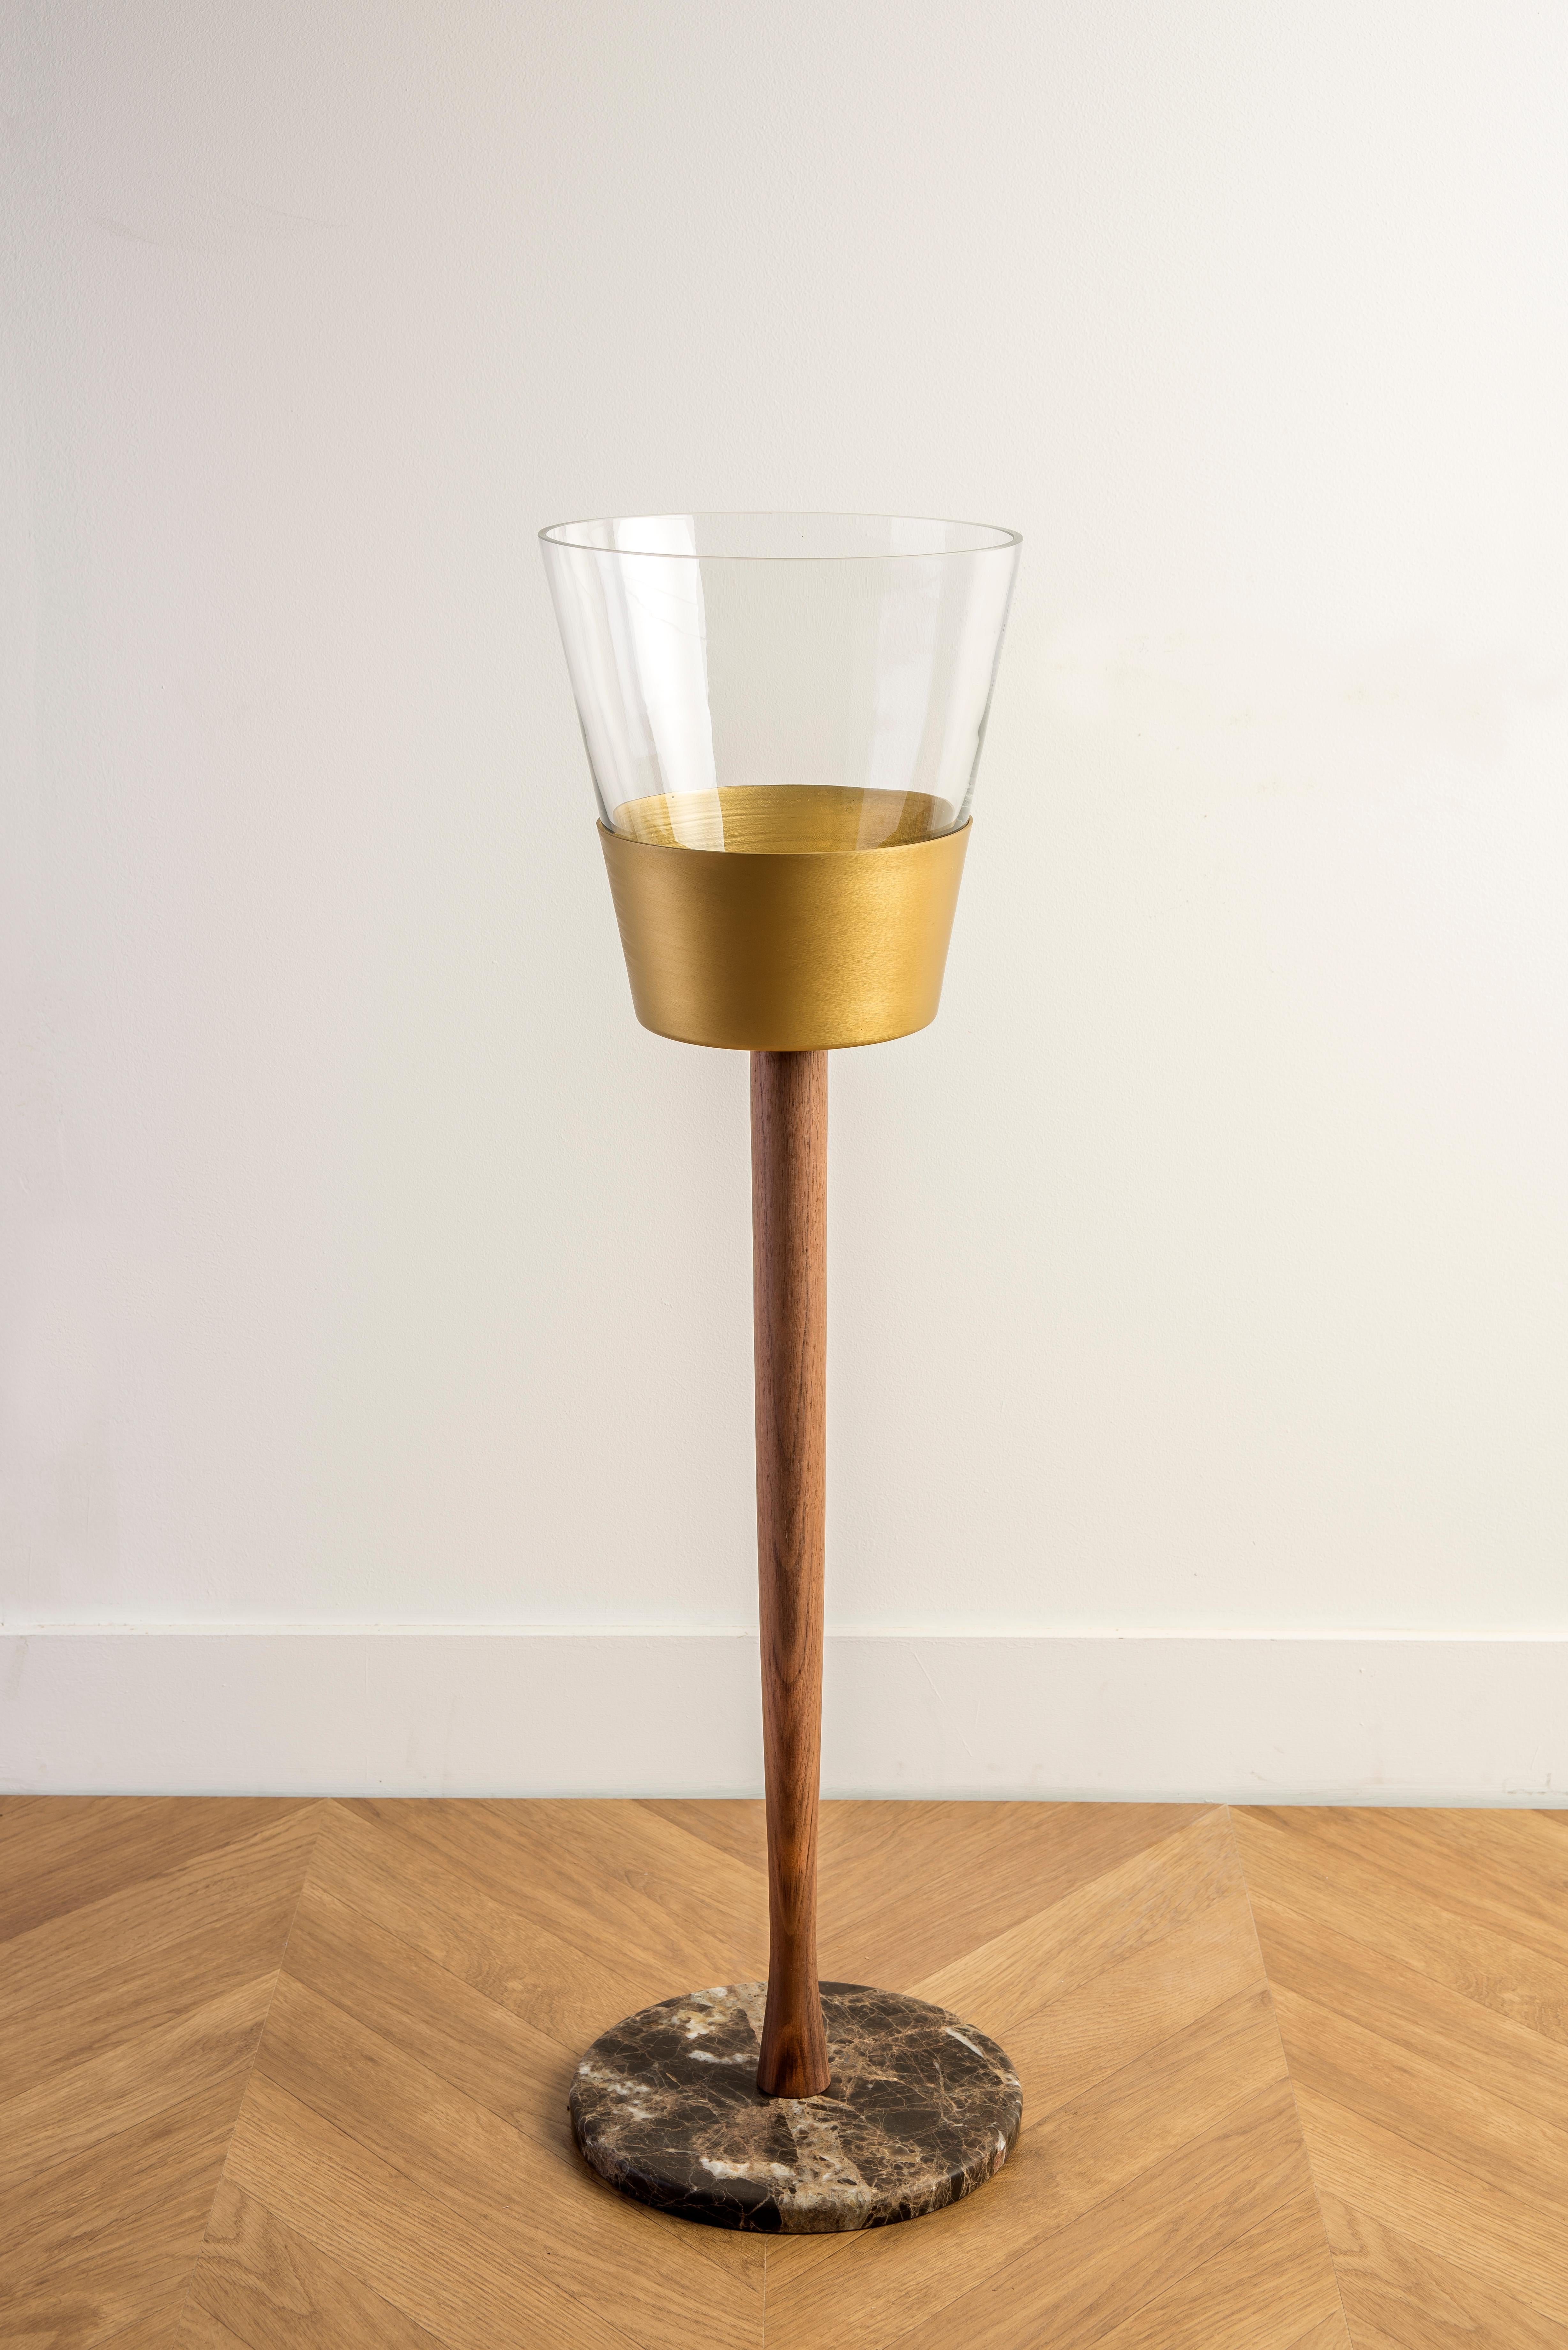 Contemporary Nomon Champagne Bucket  by Andres Martinez  For Sale